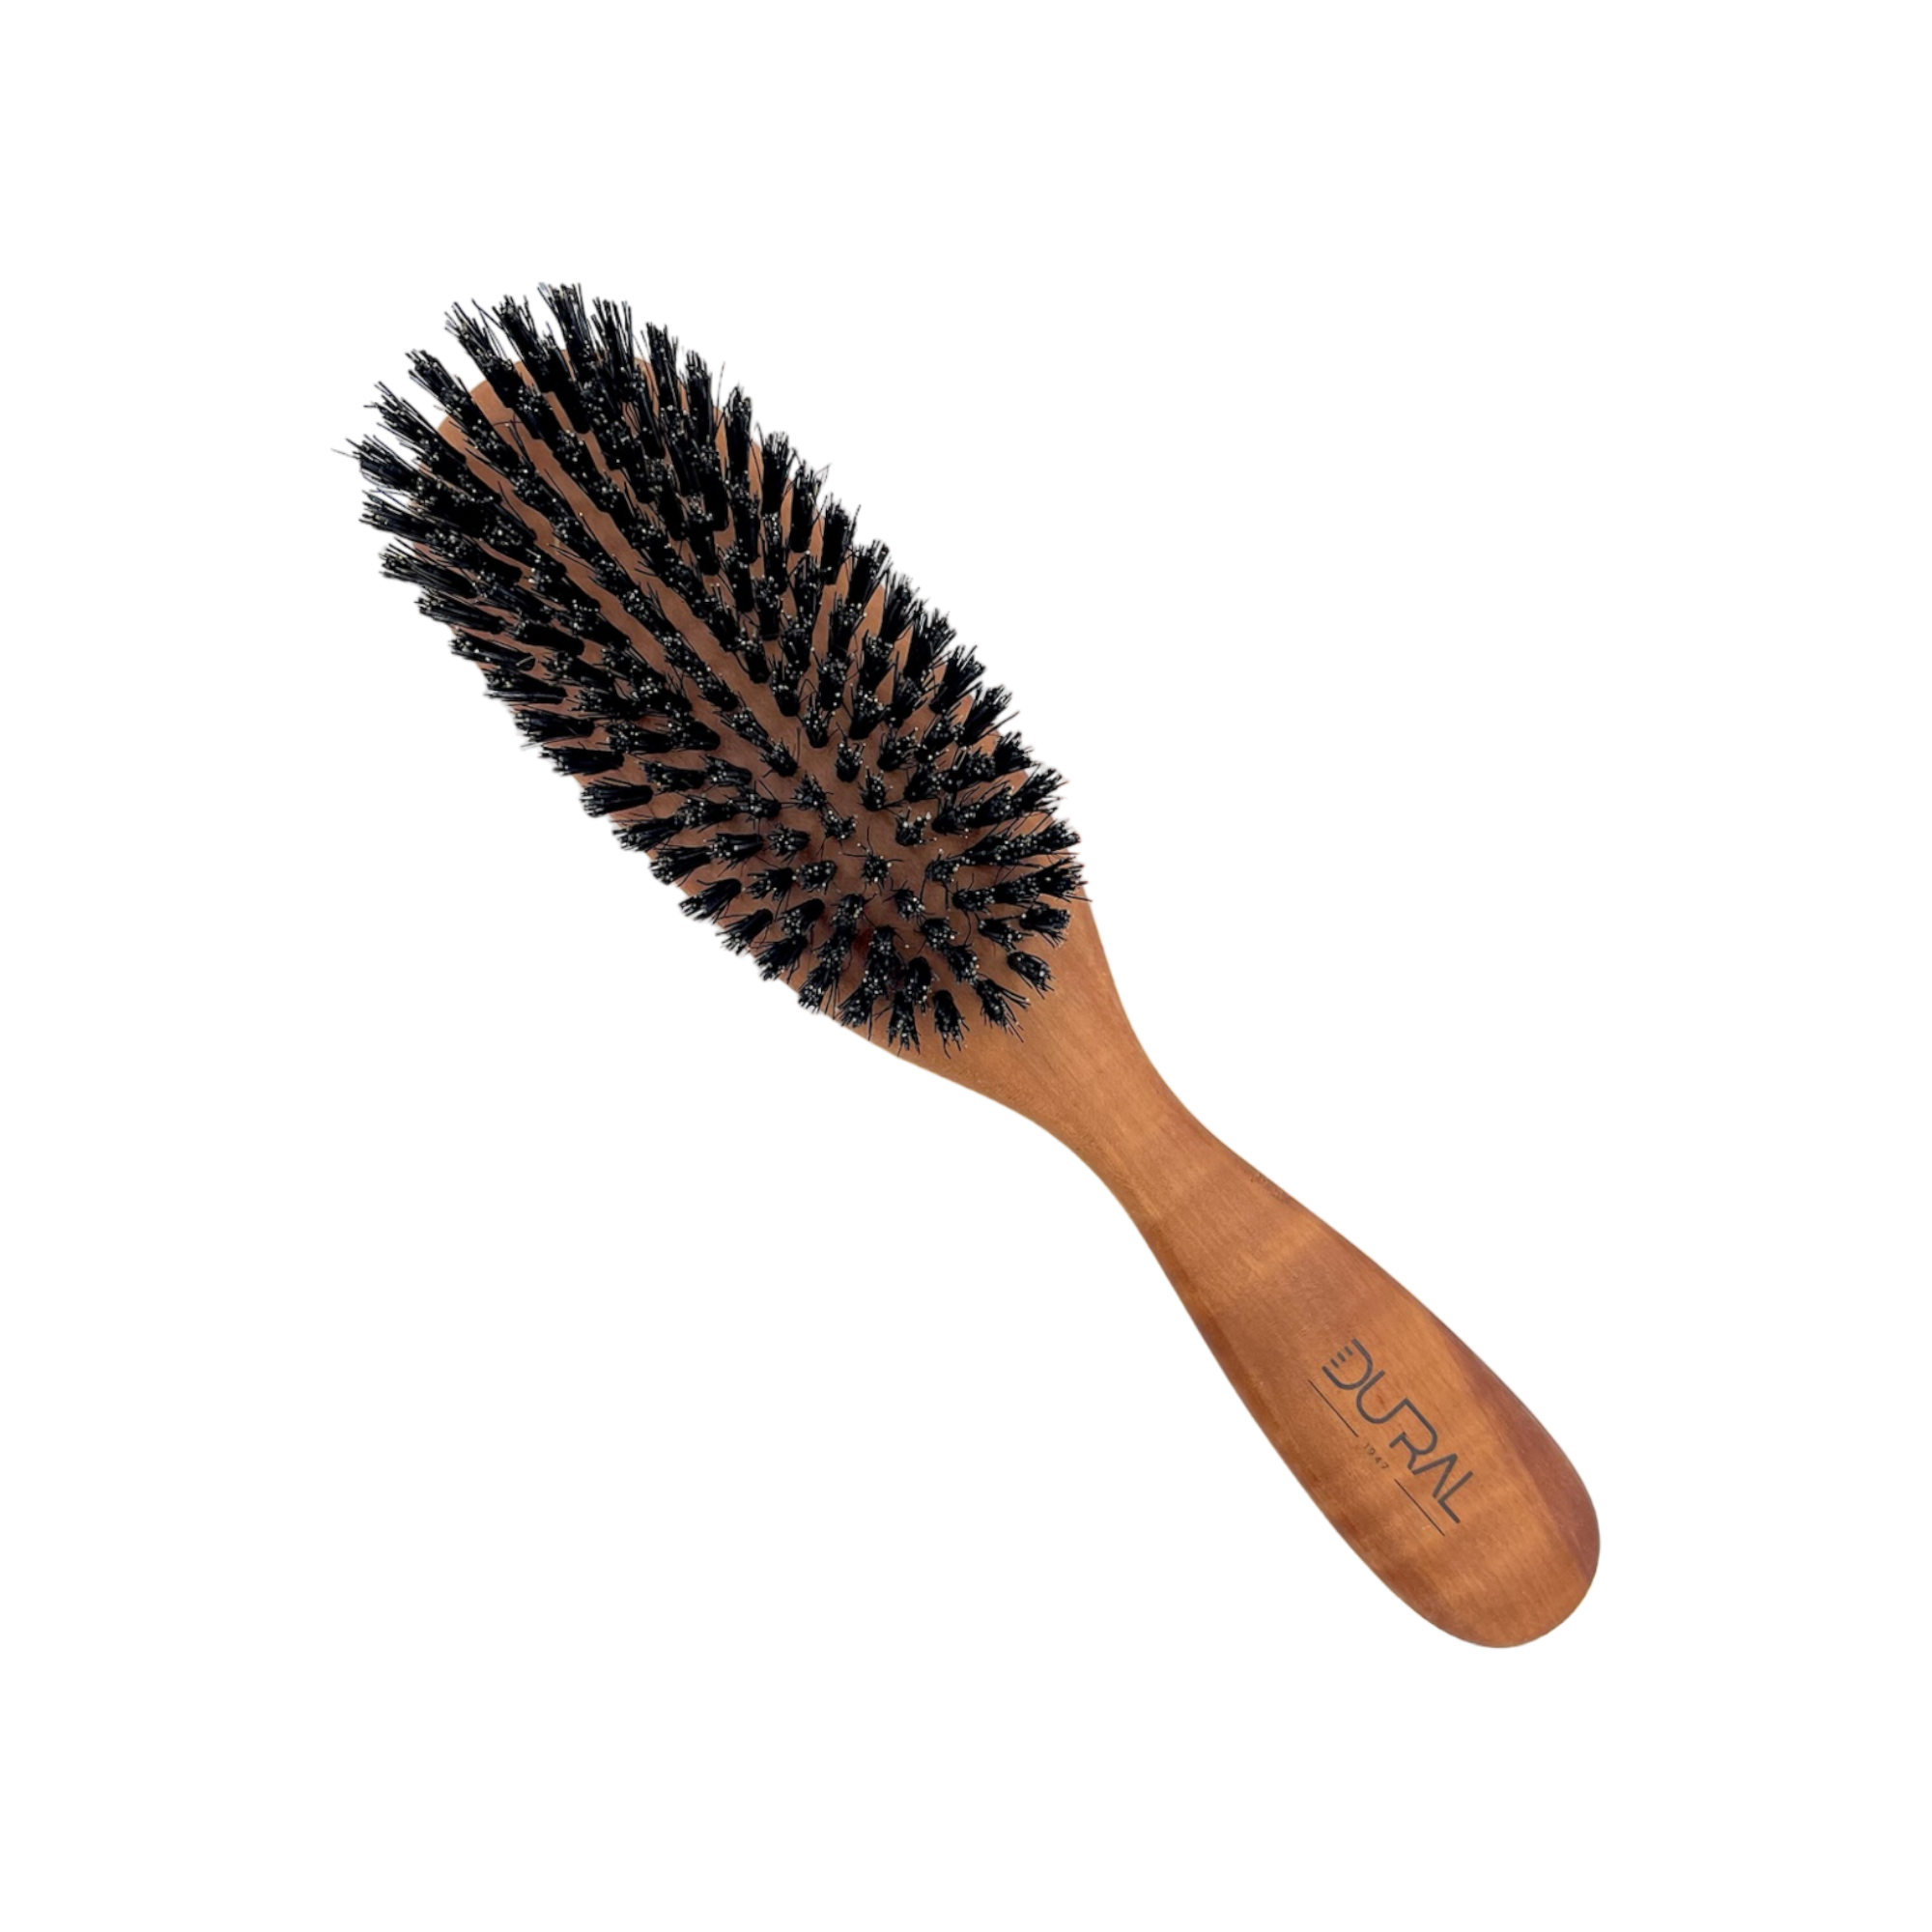 Dural Pear wood oval hair brush with boar bristles - 8 rows